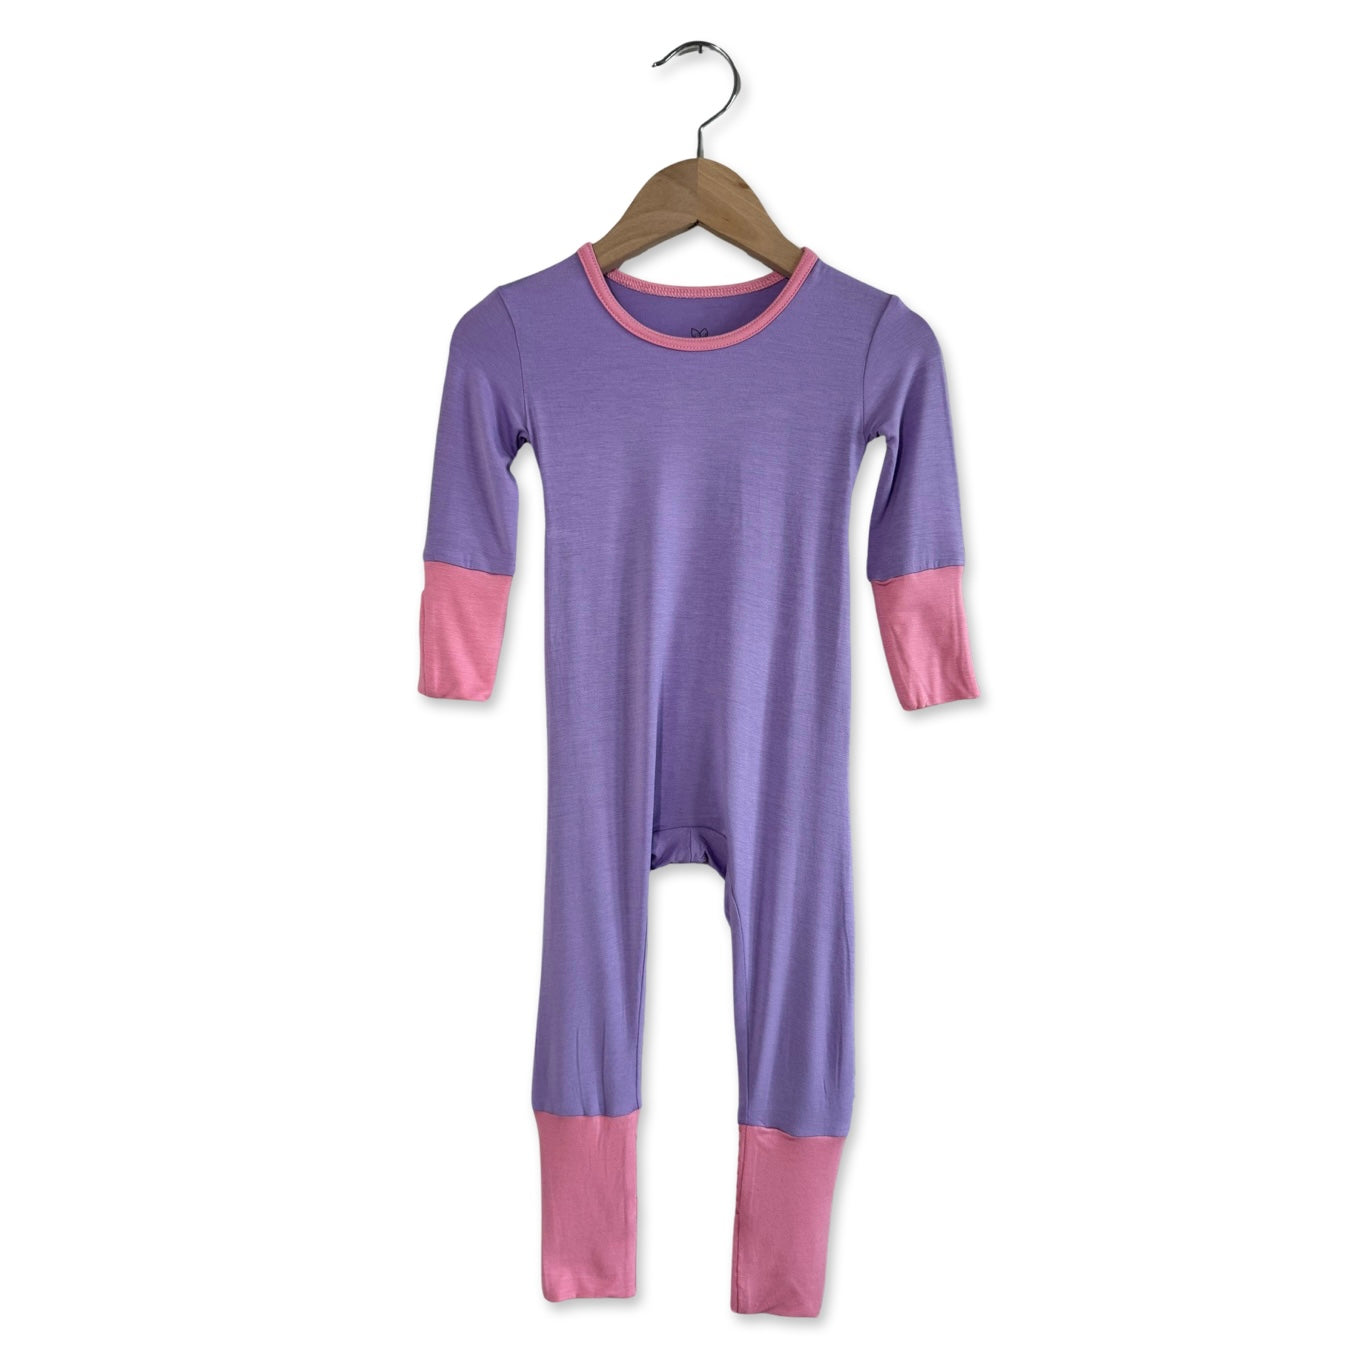 Let's Boogie Kid's Day to Night Romper